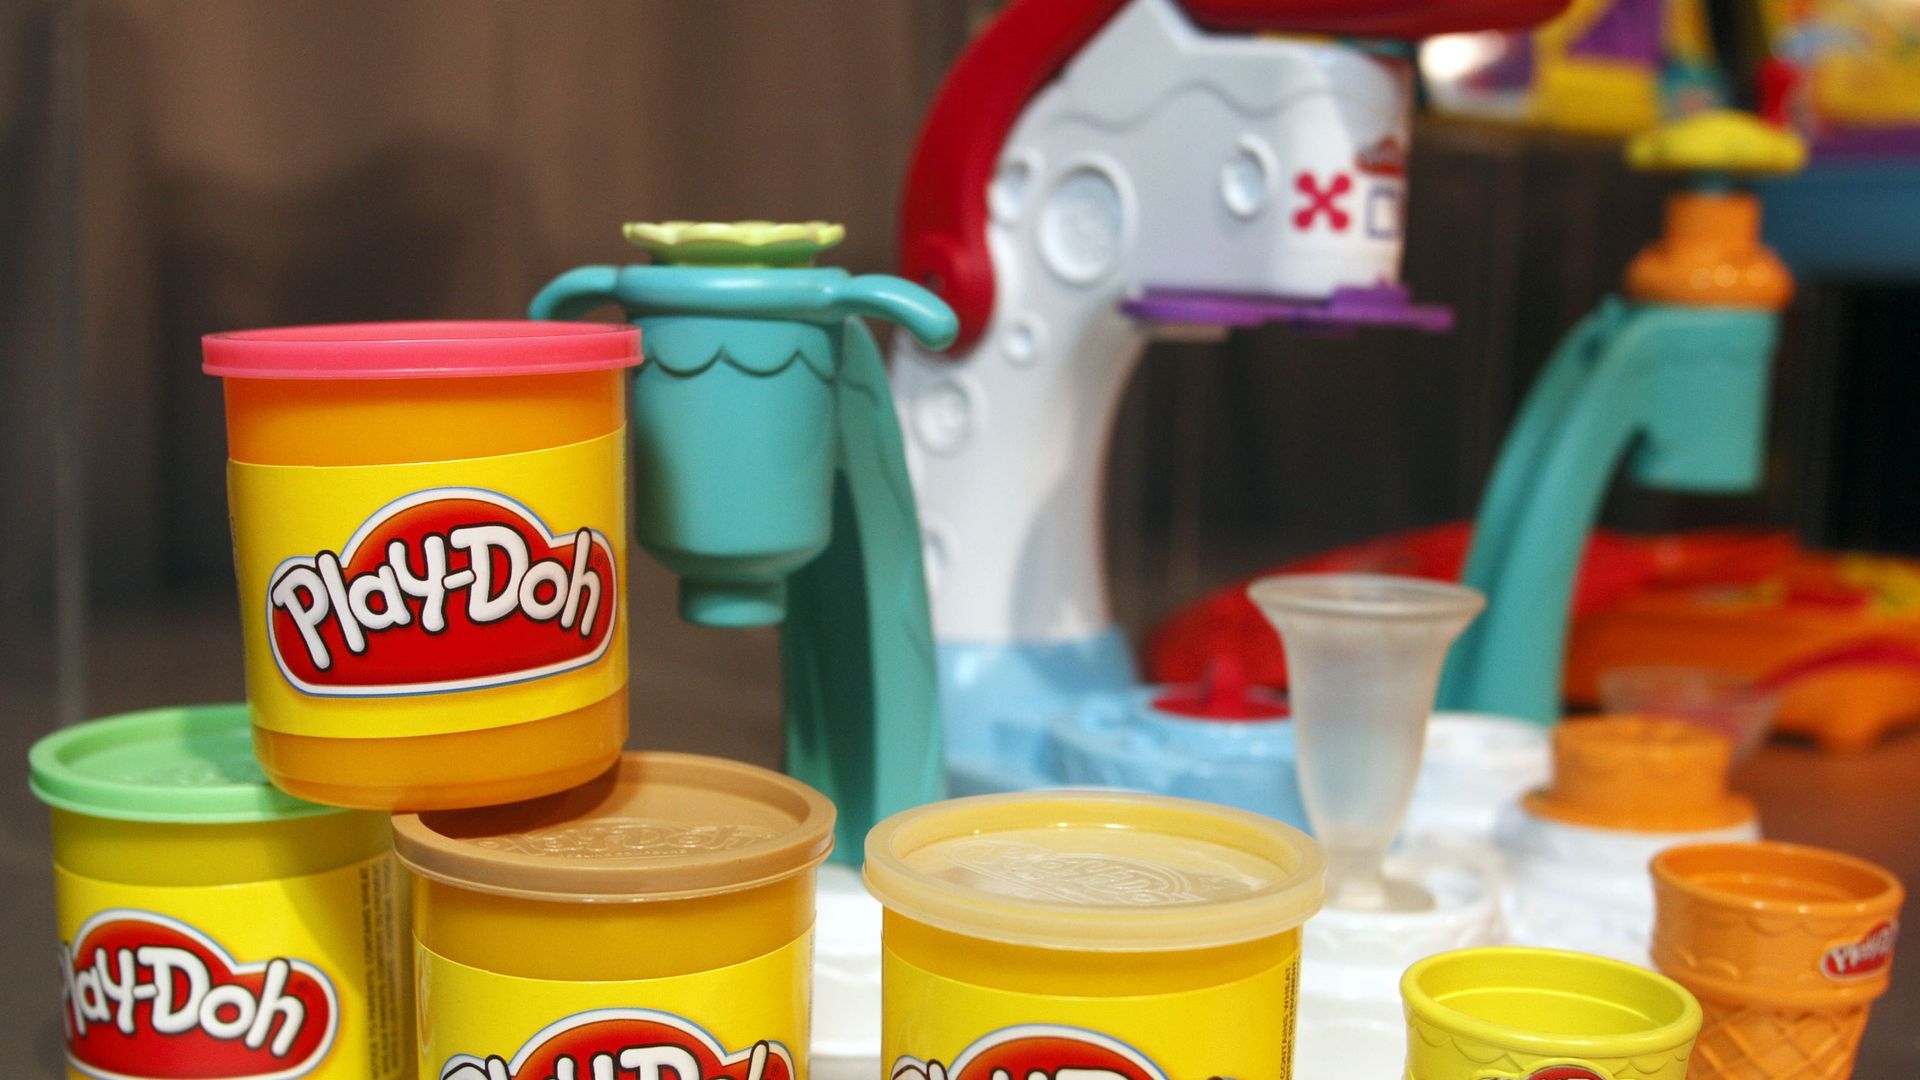 A Hasbro Play-Doh set displayed at the New York Toy Fair in 2008. Photo: Getty Images